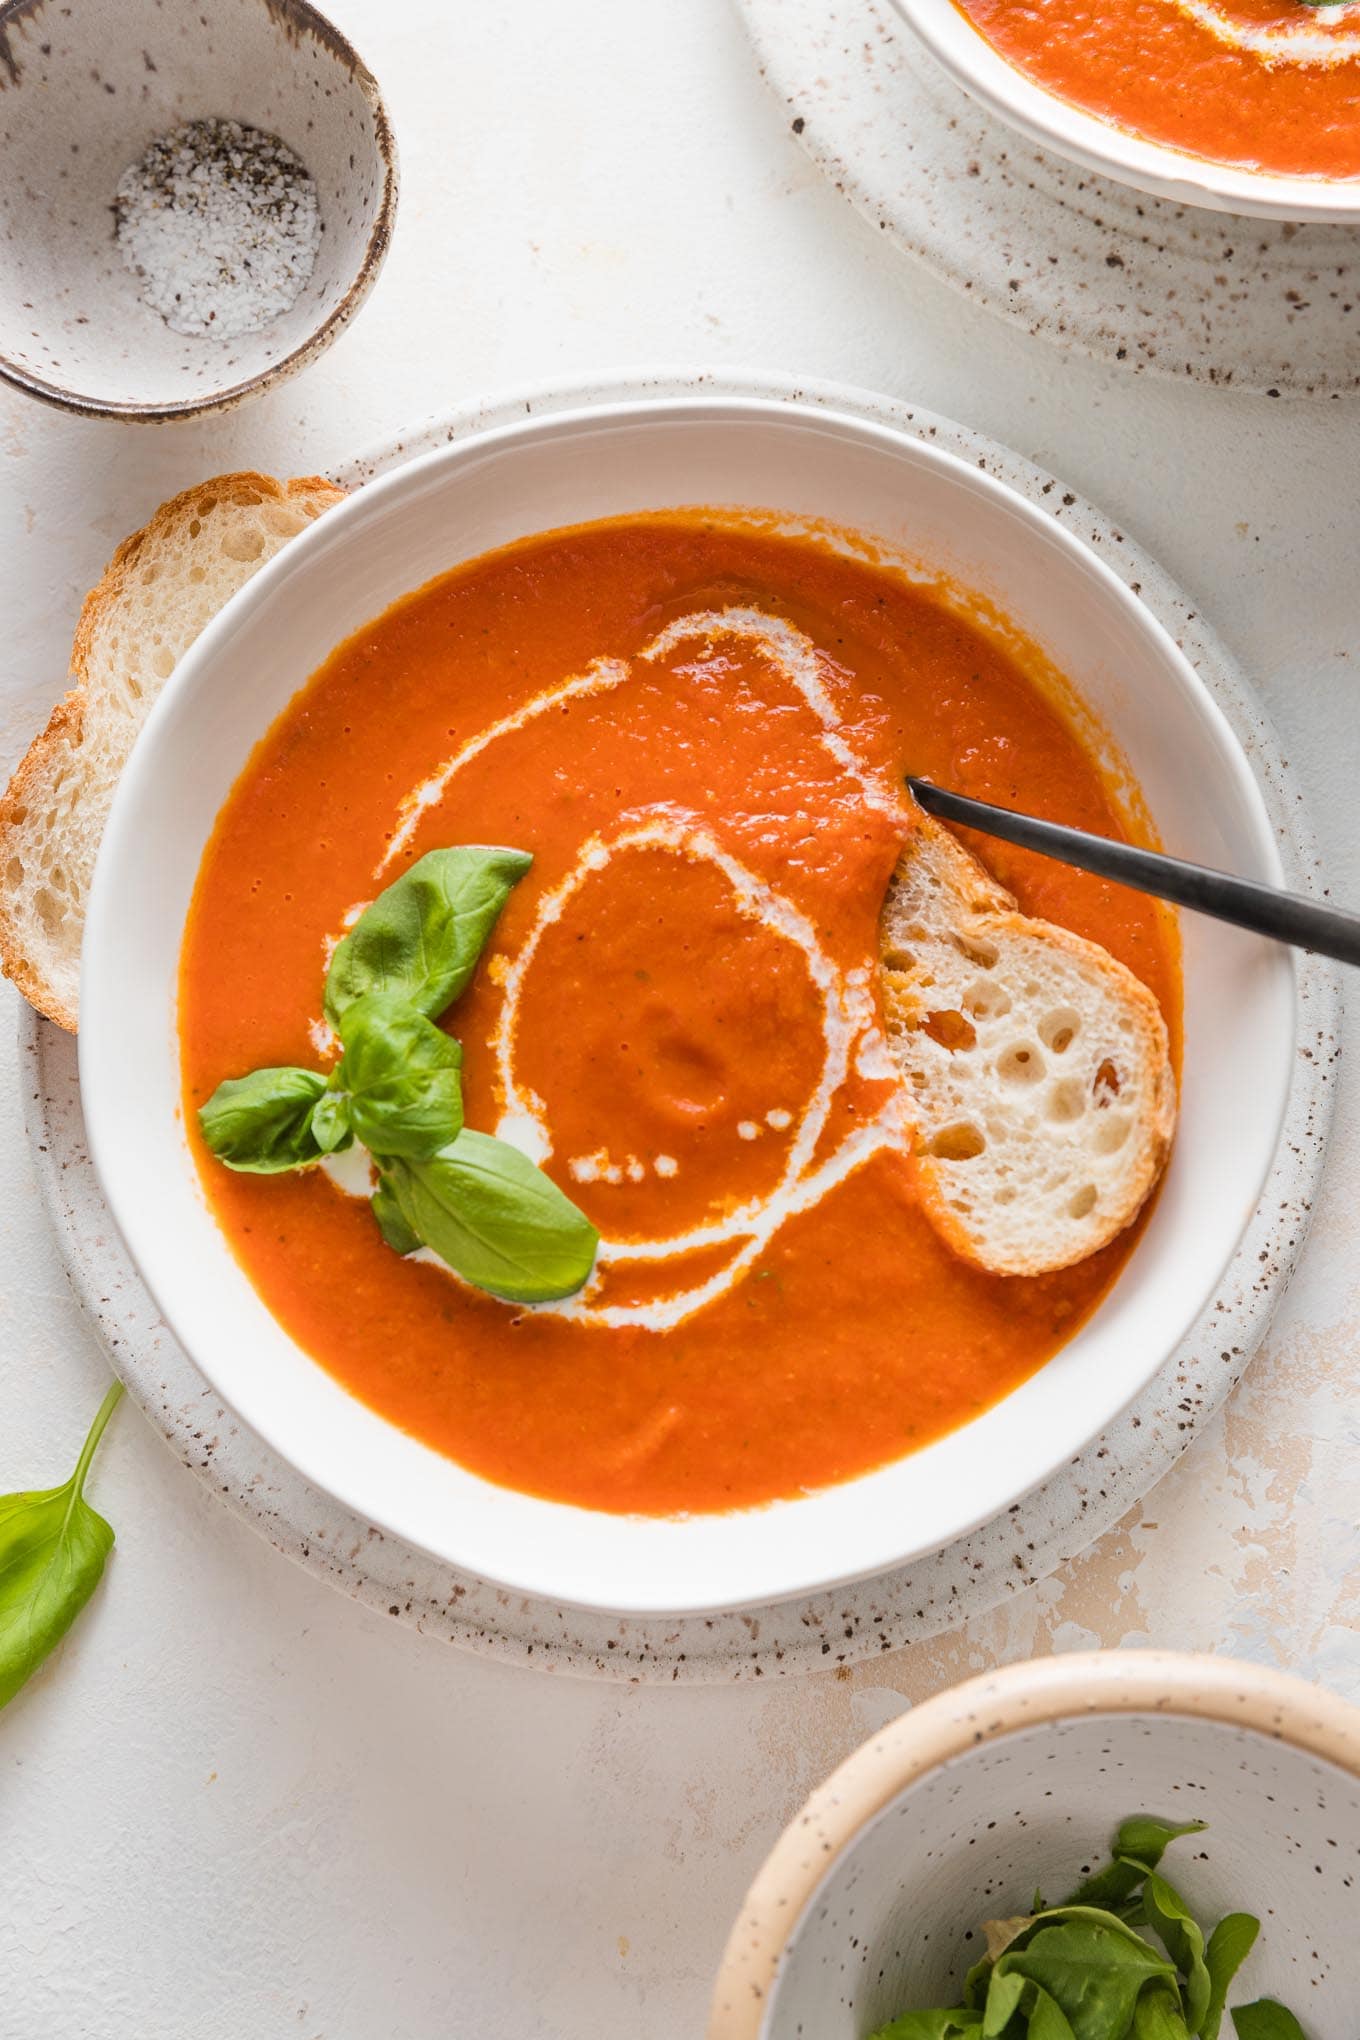 https://www.nourish-and-fete.com/wp-content/uploads/2020/08/roasted-tomato-basil-soup-5.jpg